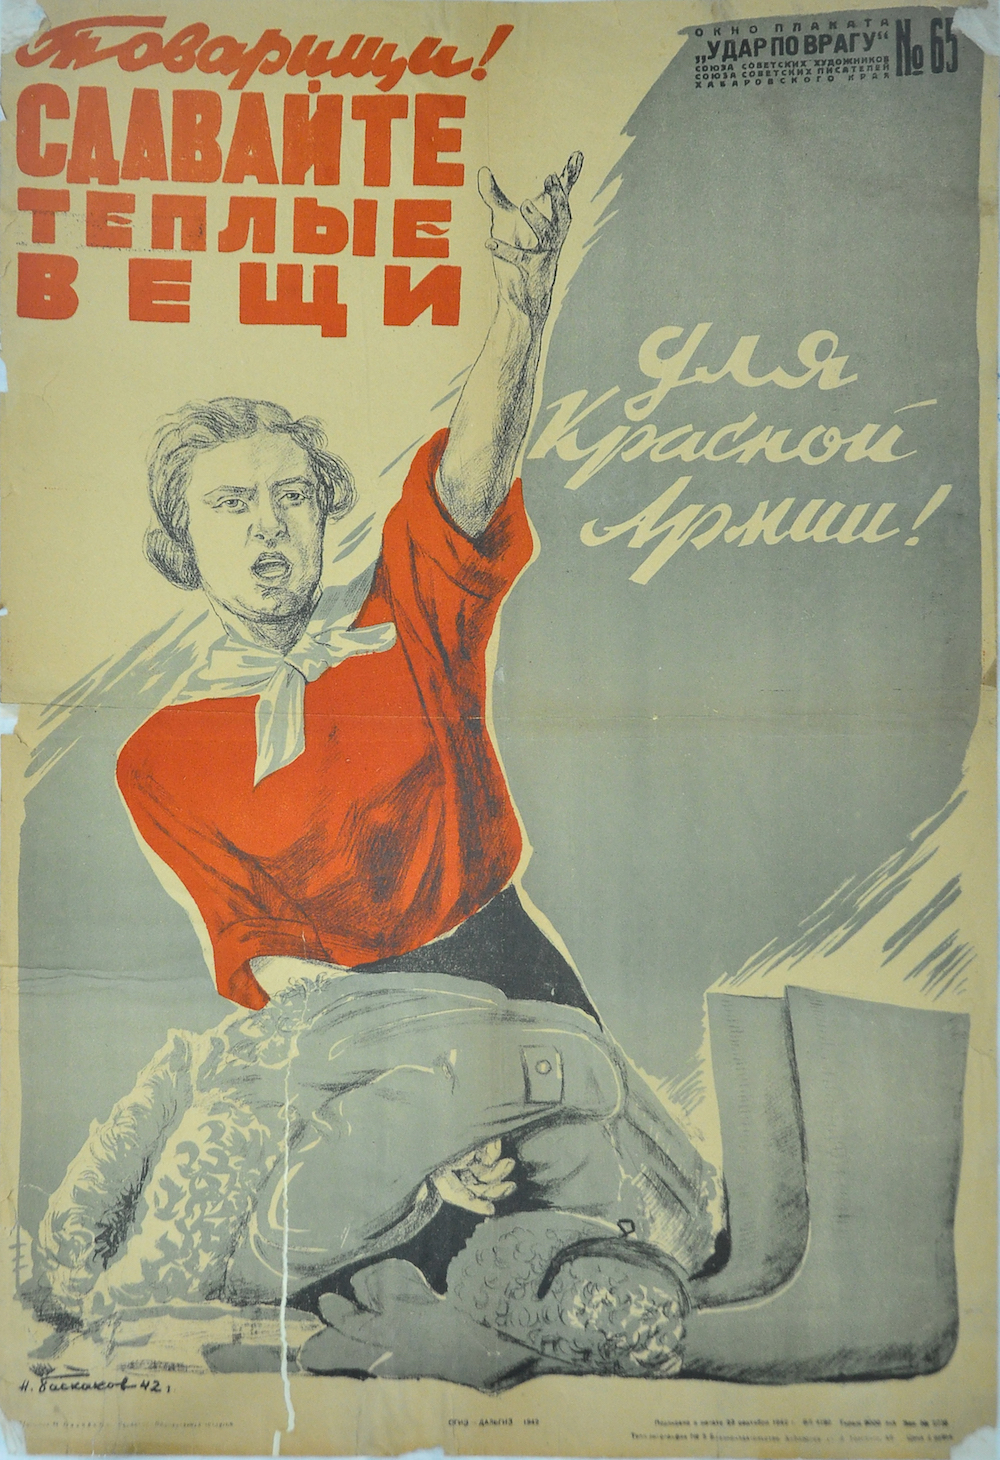 “Comrades, give your warm clothes to the Red Army!”